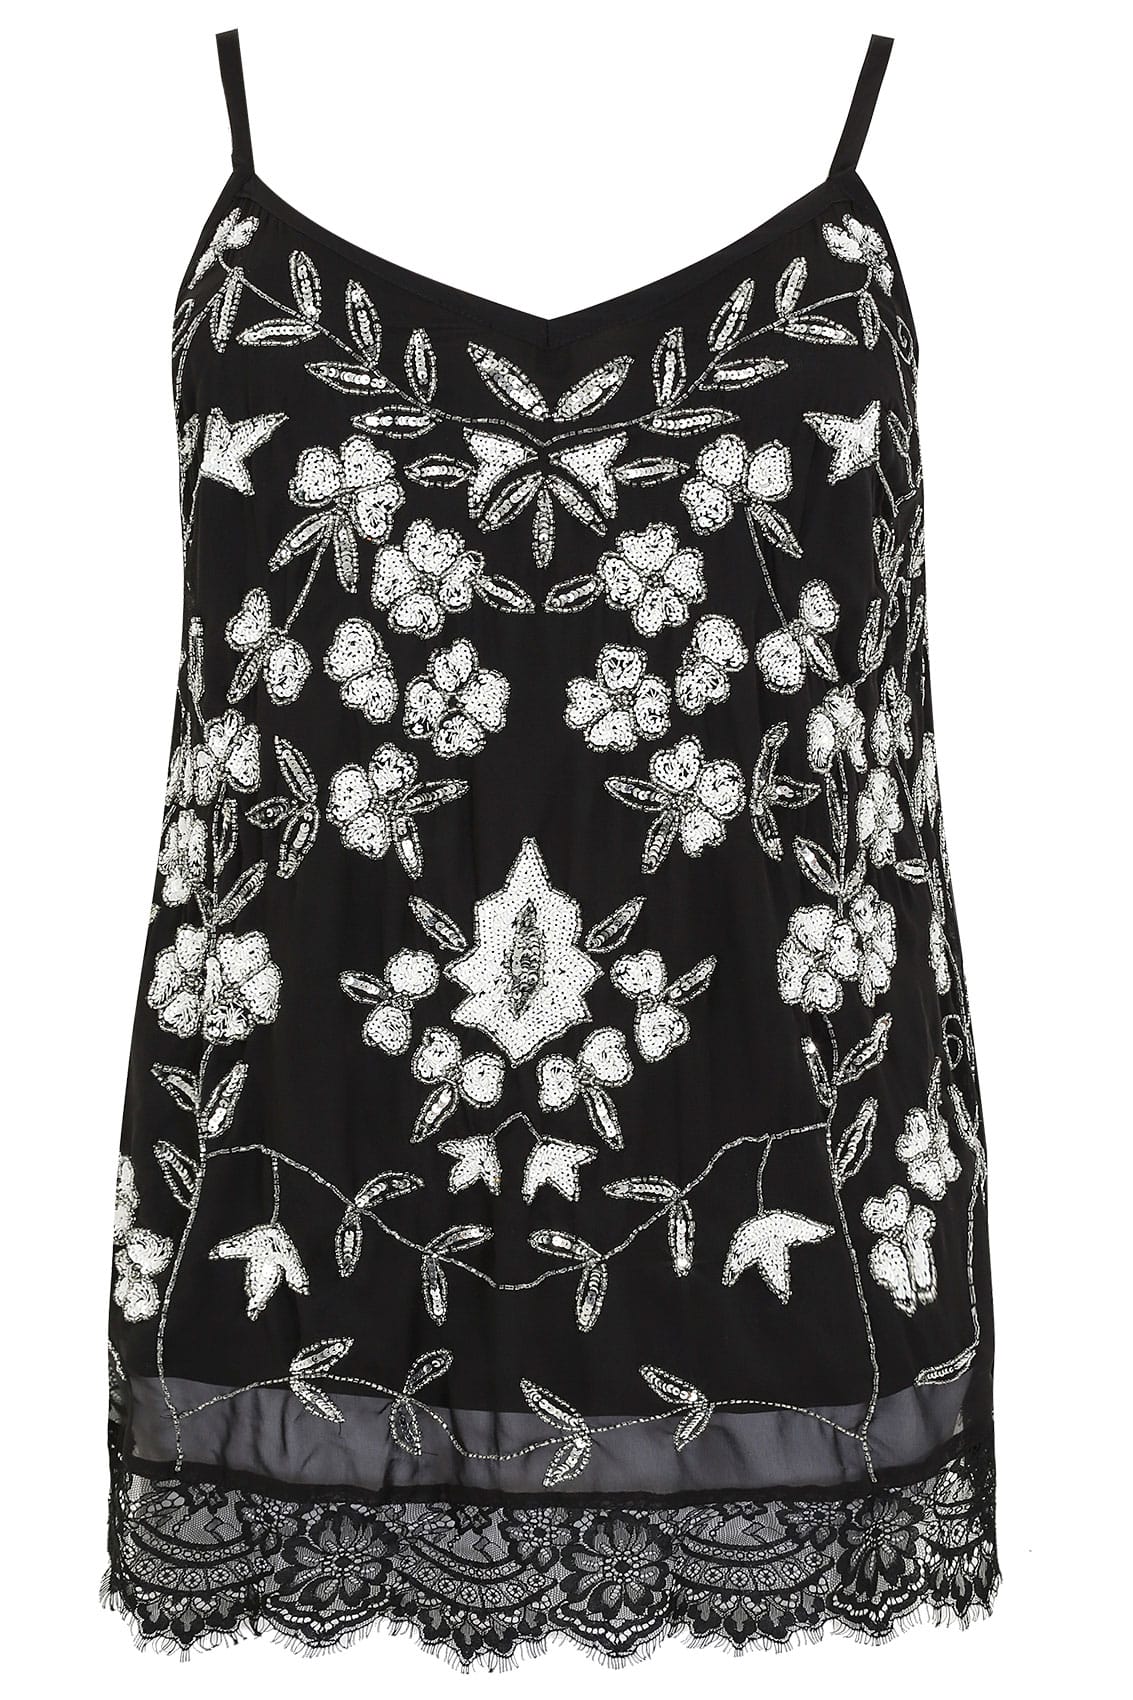 LUXE Black Floral Embellished Top With Lace Hem, Plus size 16 to 32